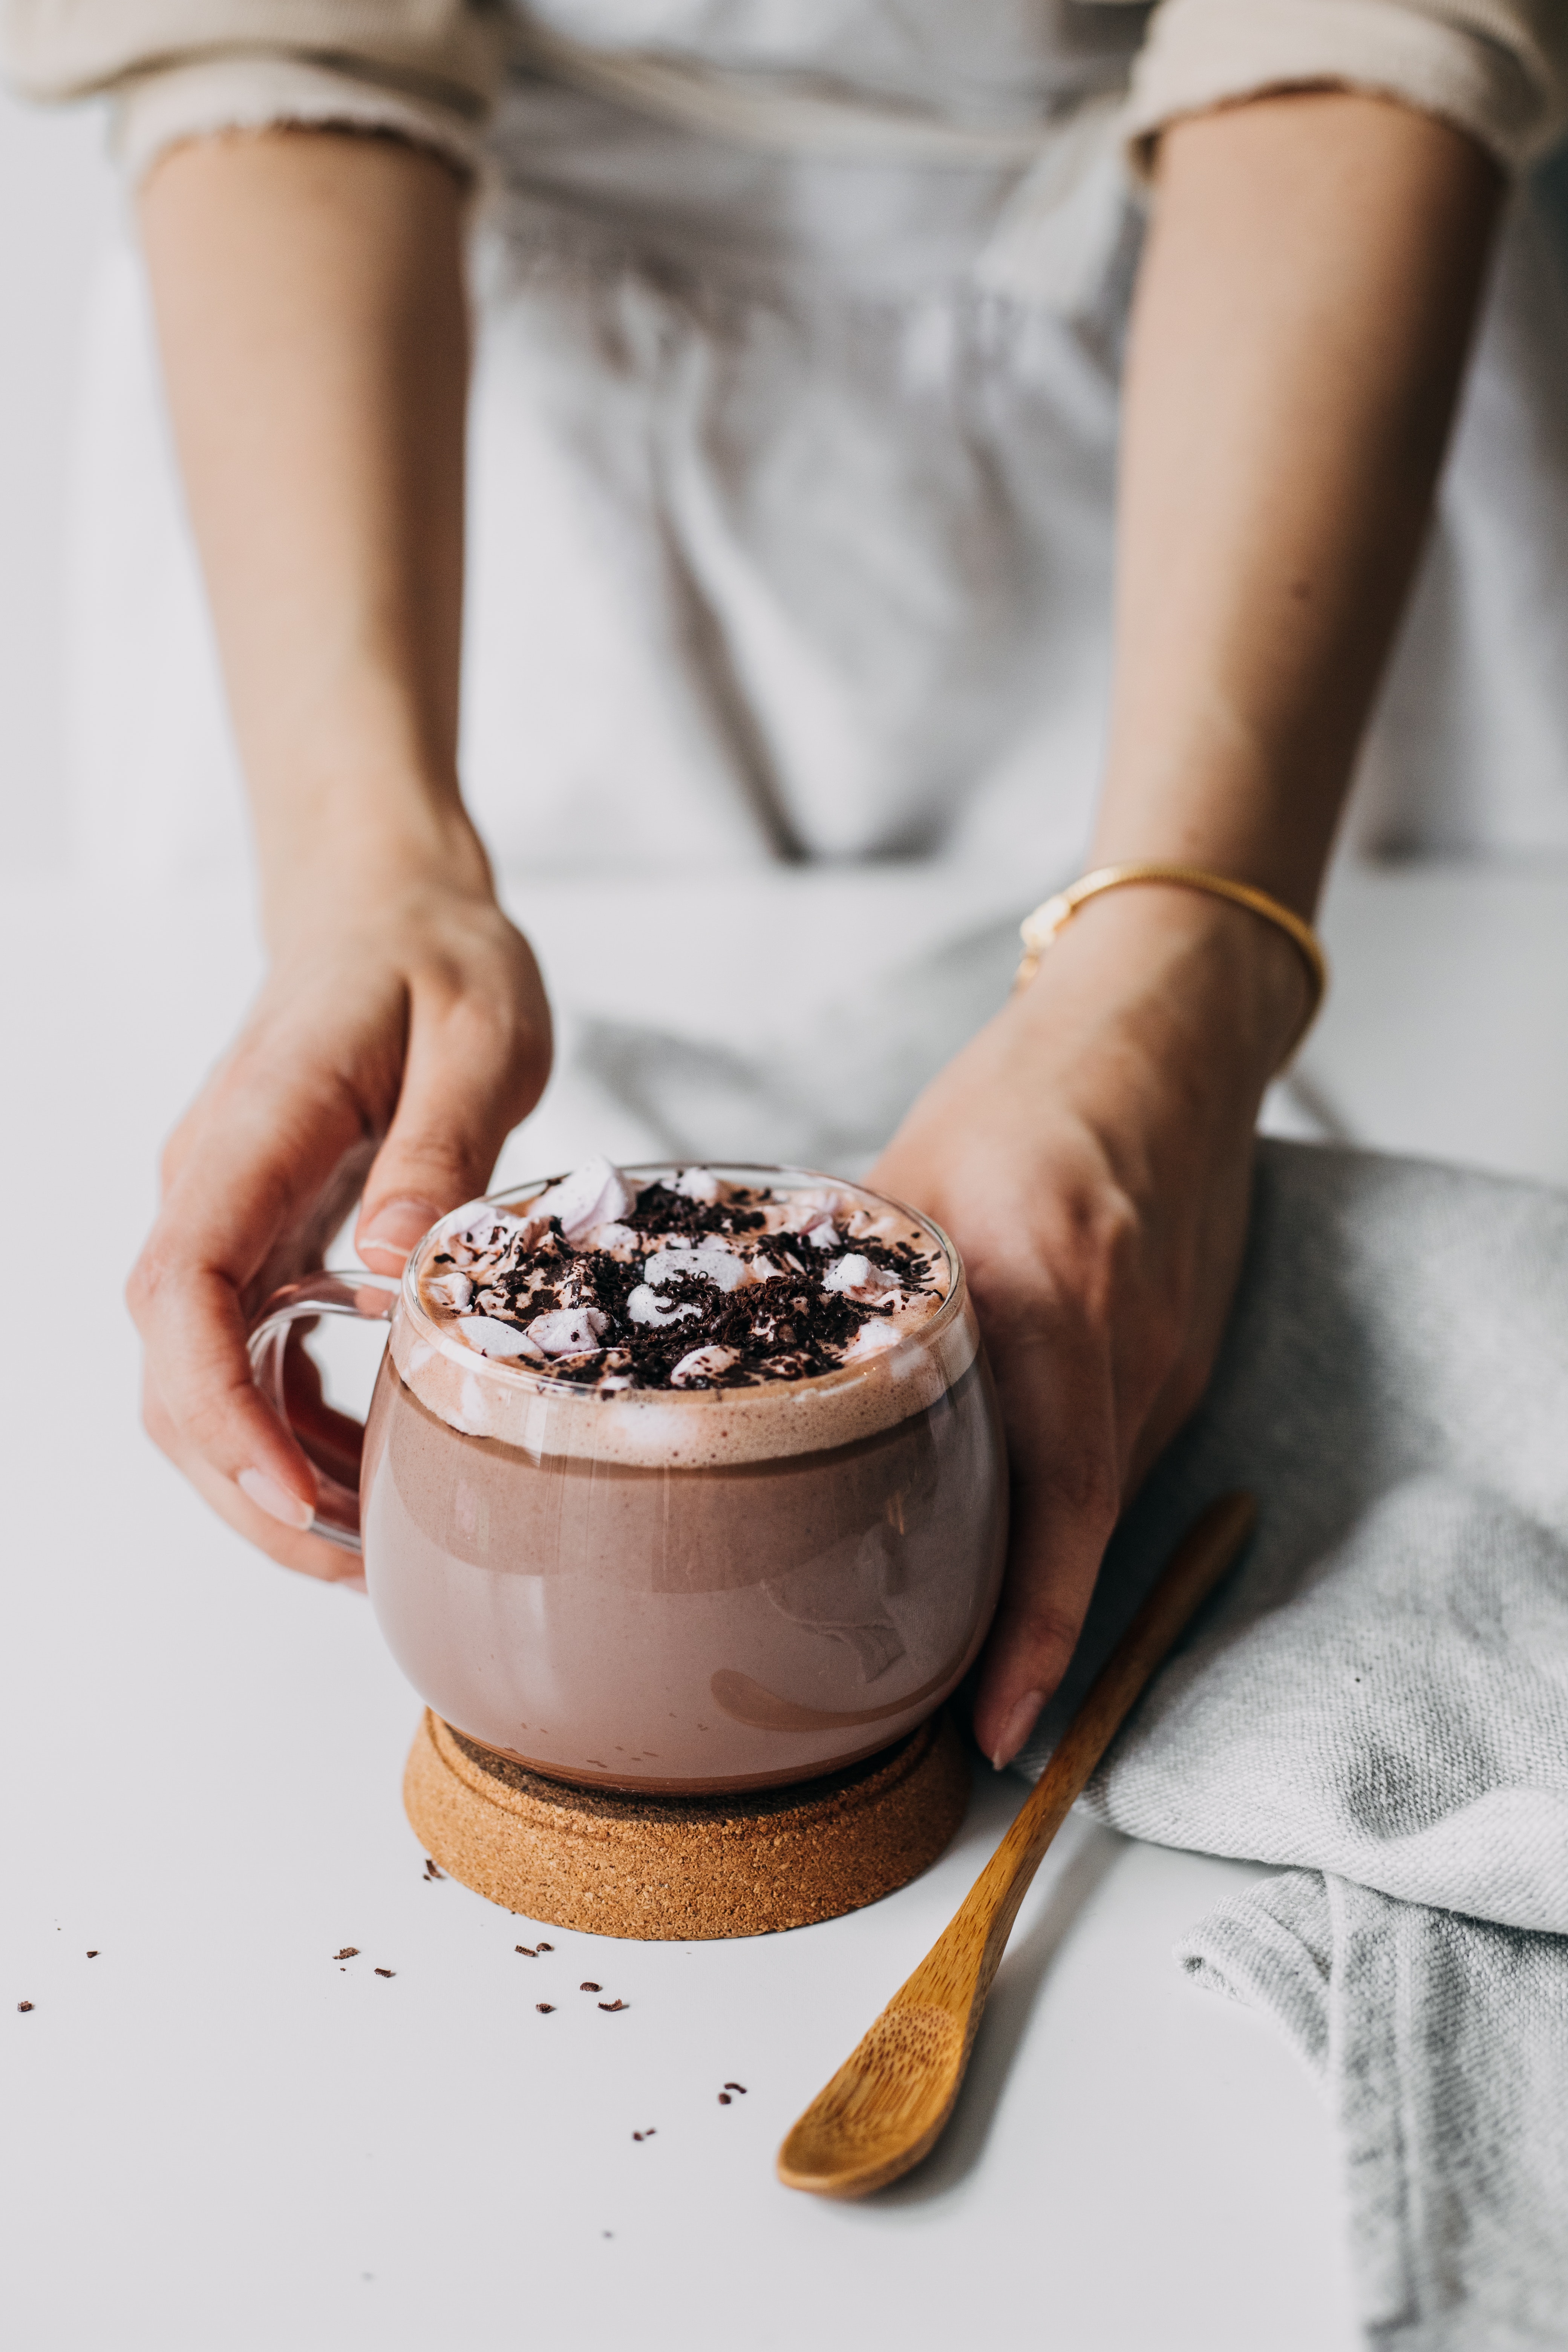 A cup of hot chocolate | Source: Pexels